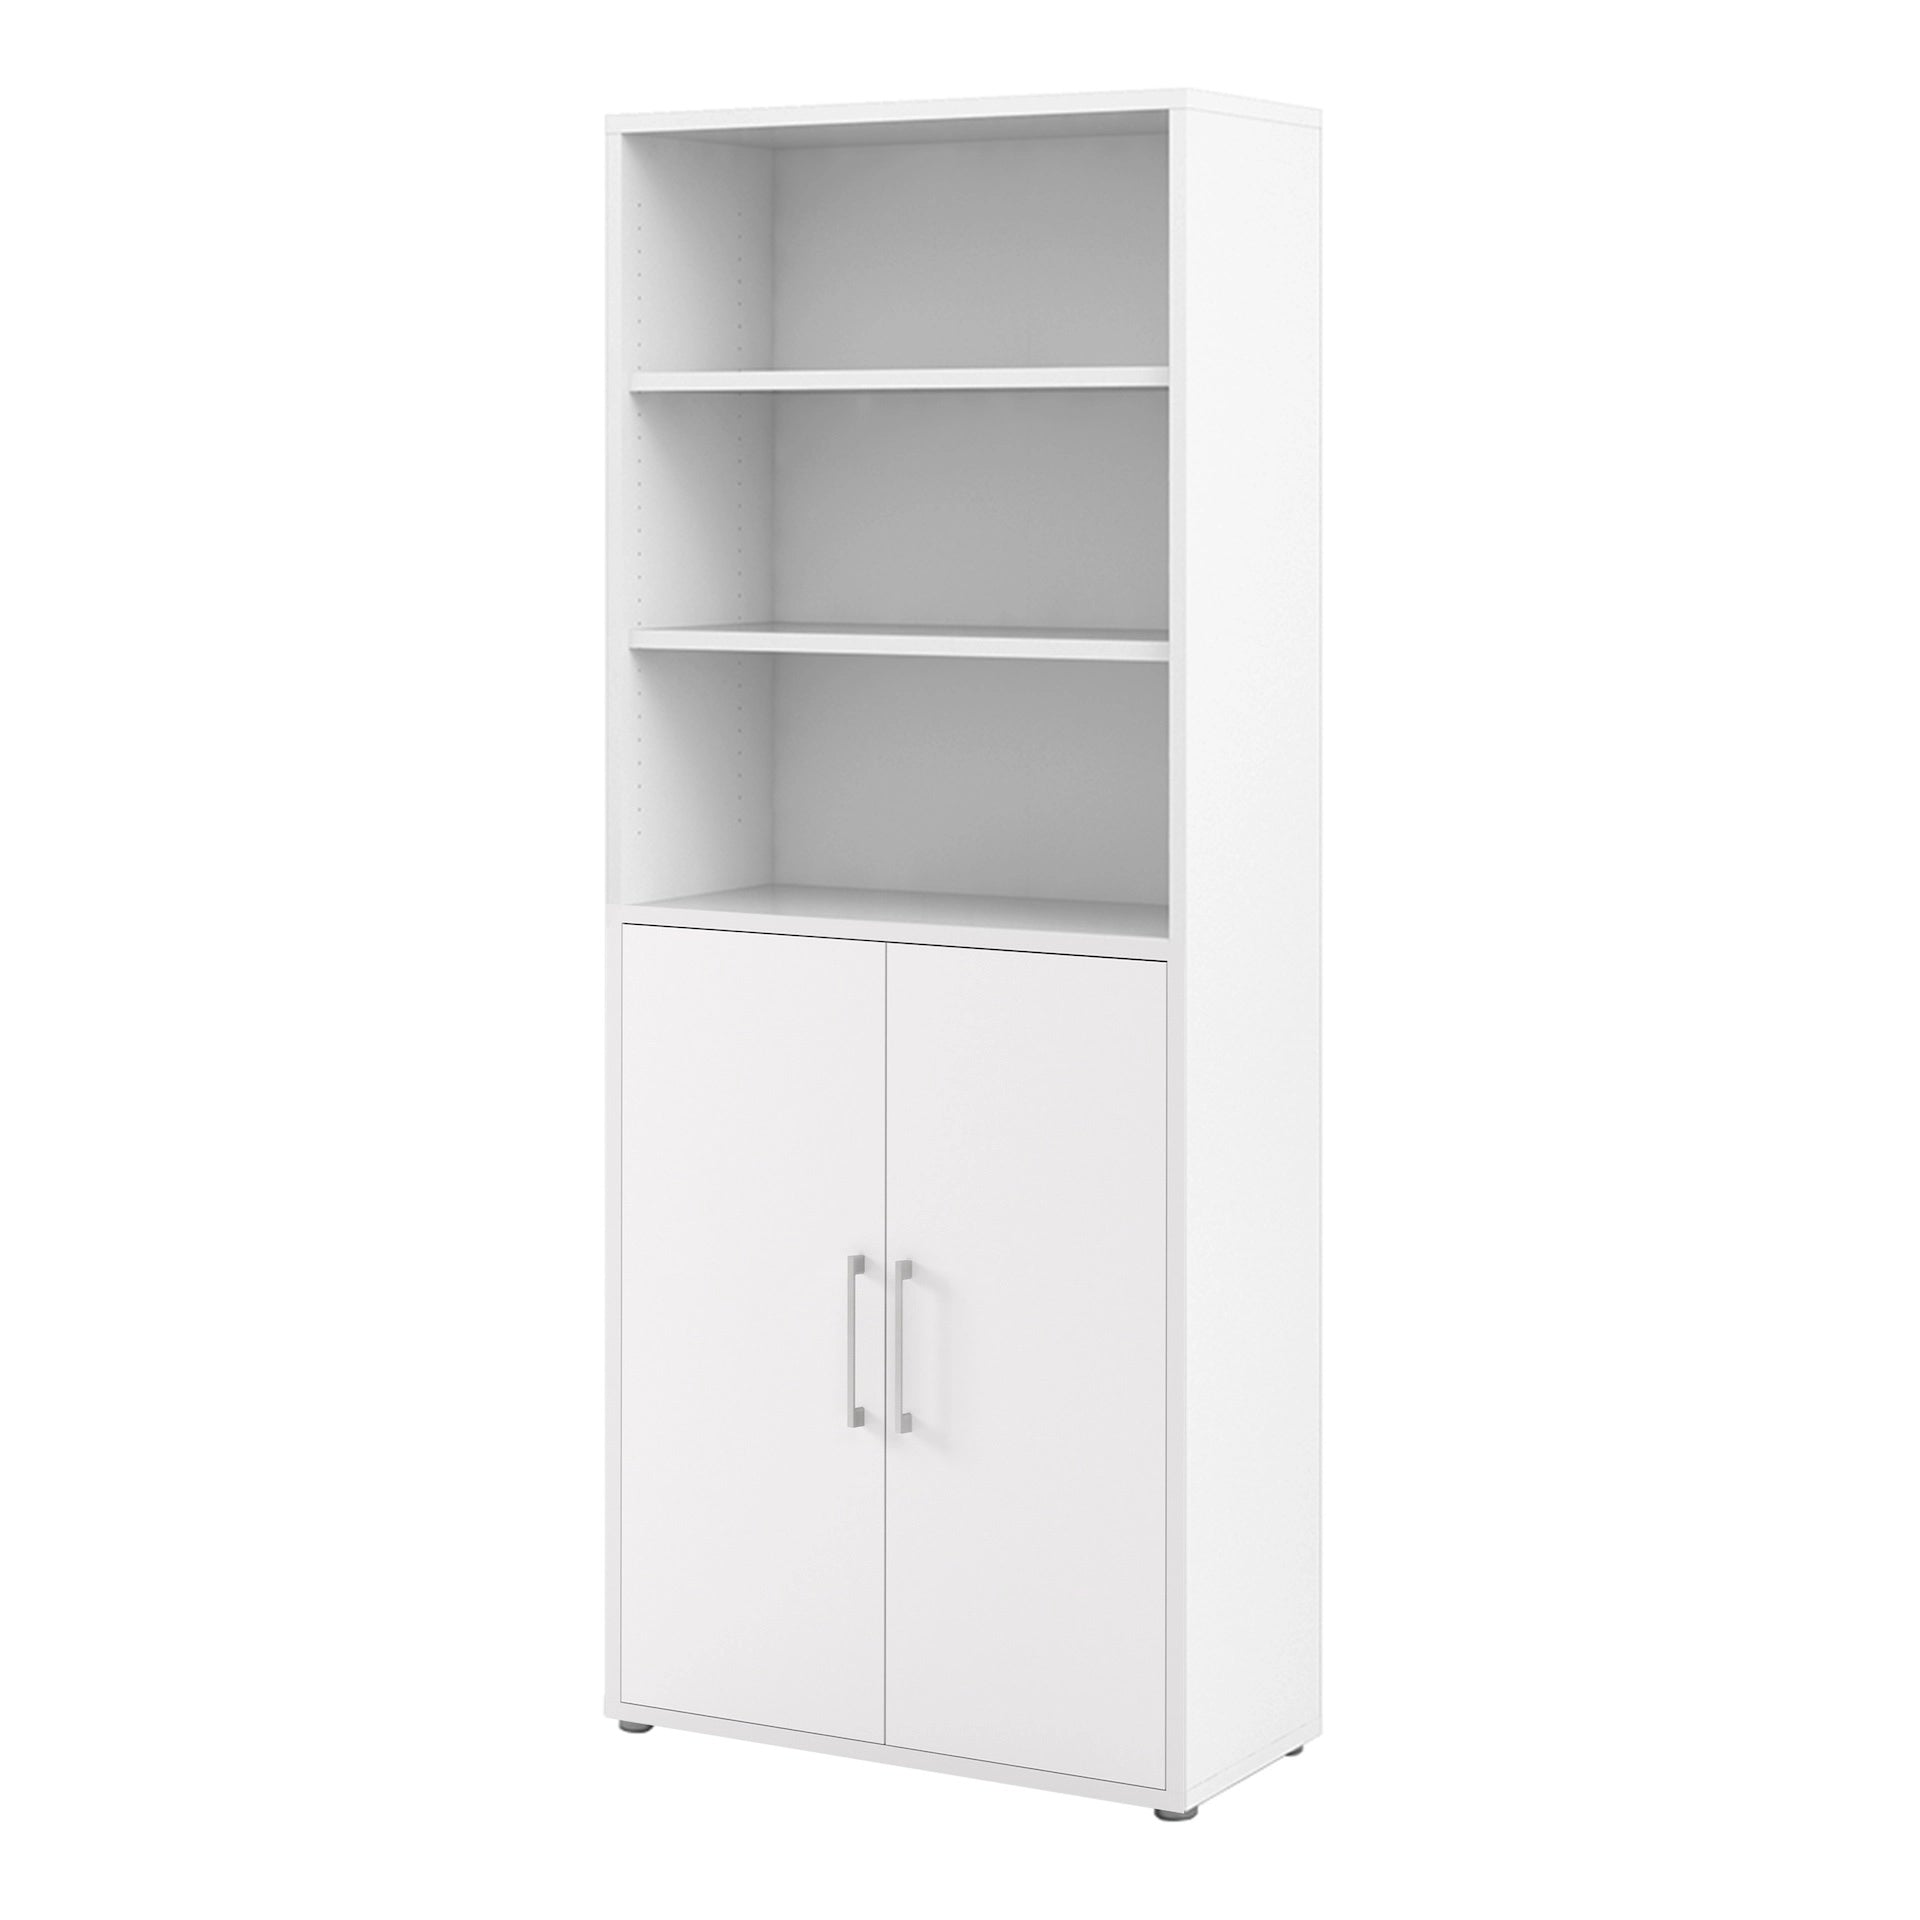 Furniture To Go Prima Bookcase 4 Shelves with 2 Doors in White